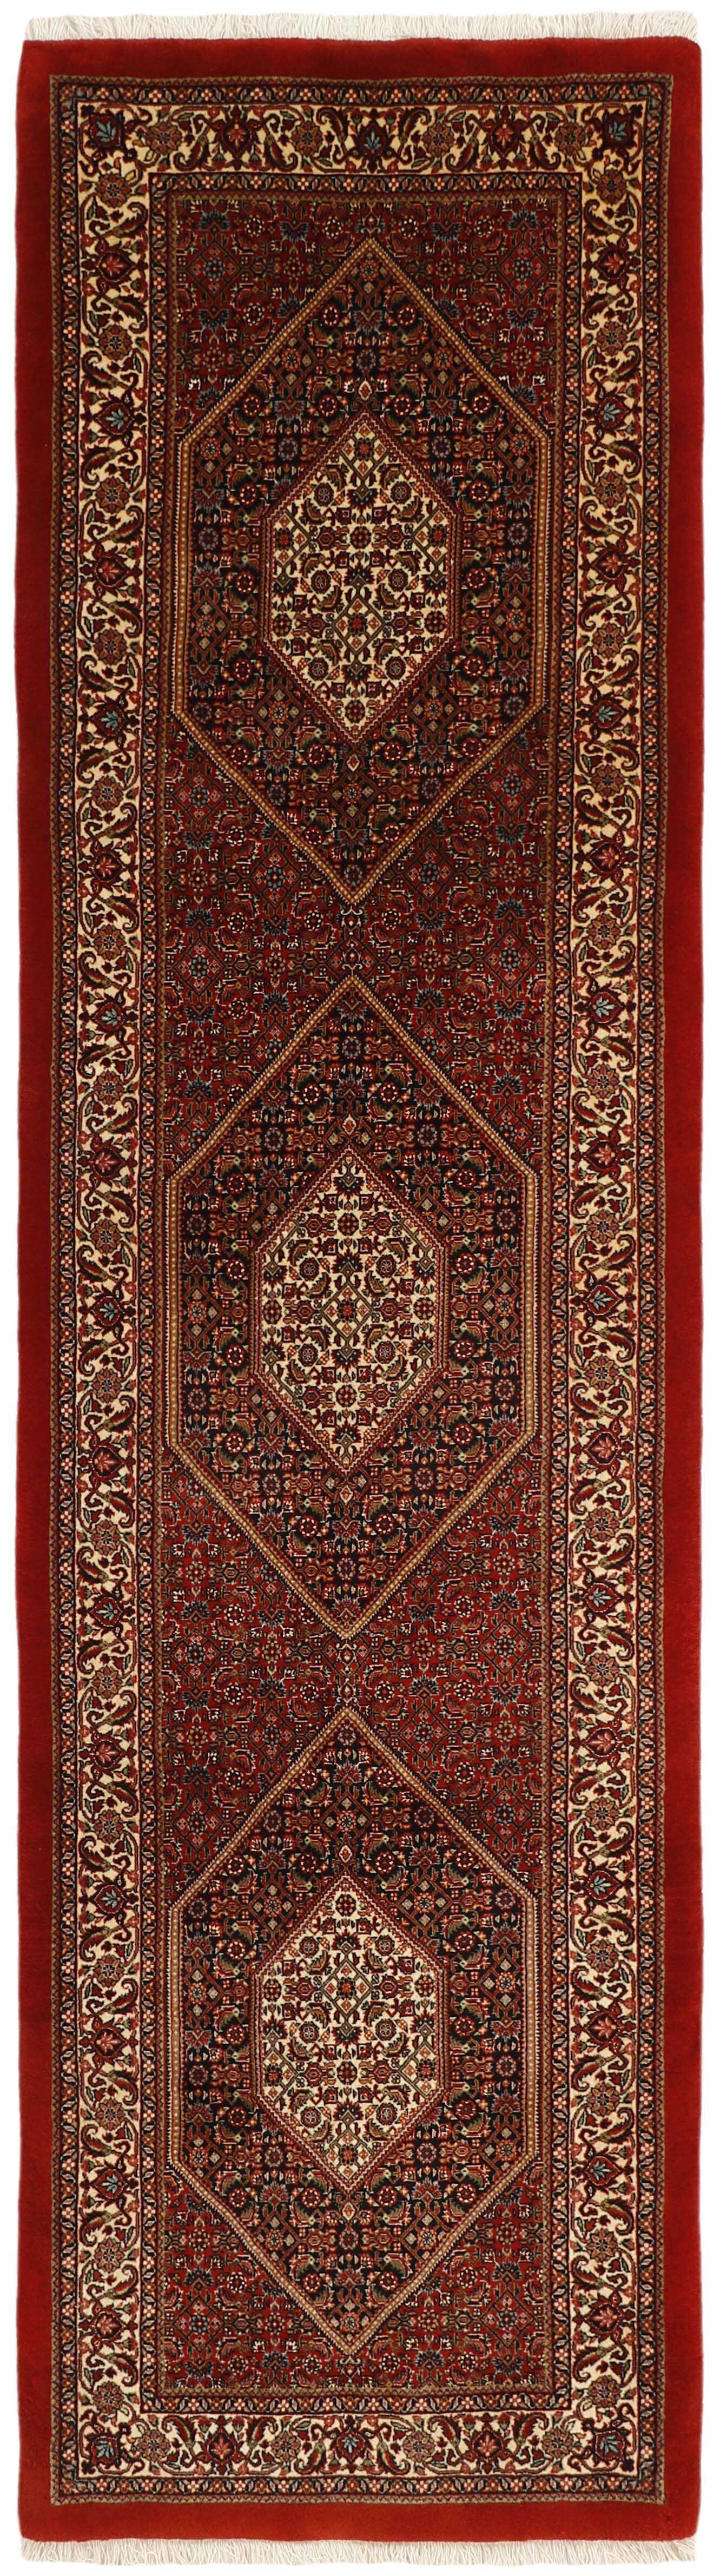 Red persian runner with traditional floral design